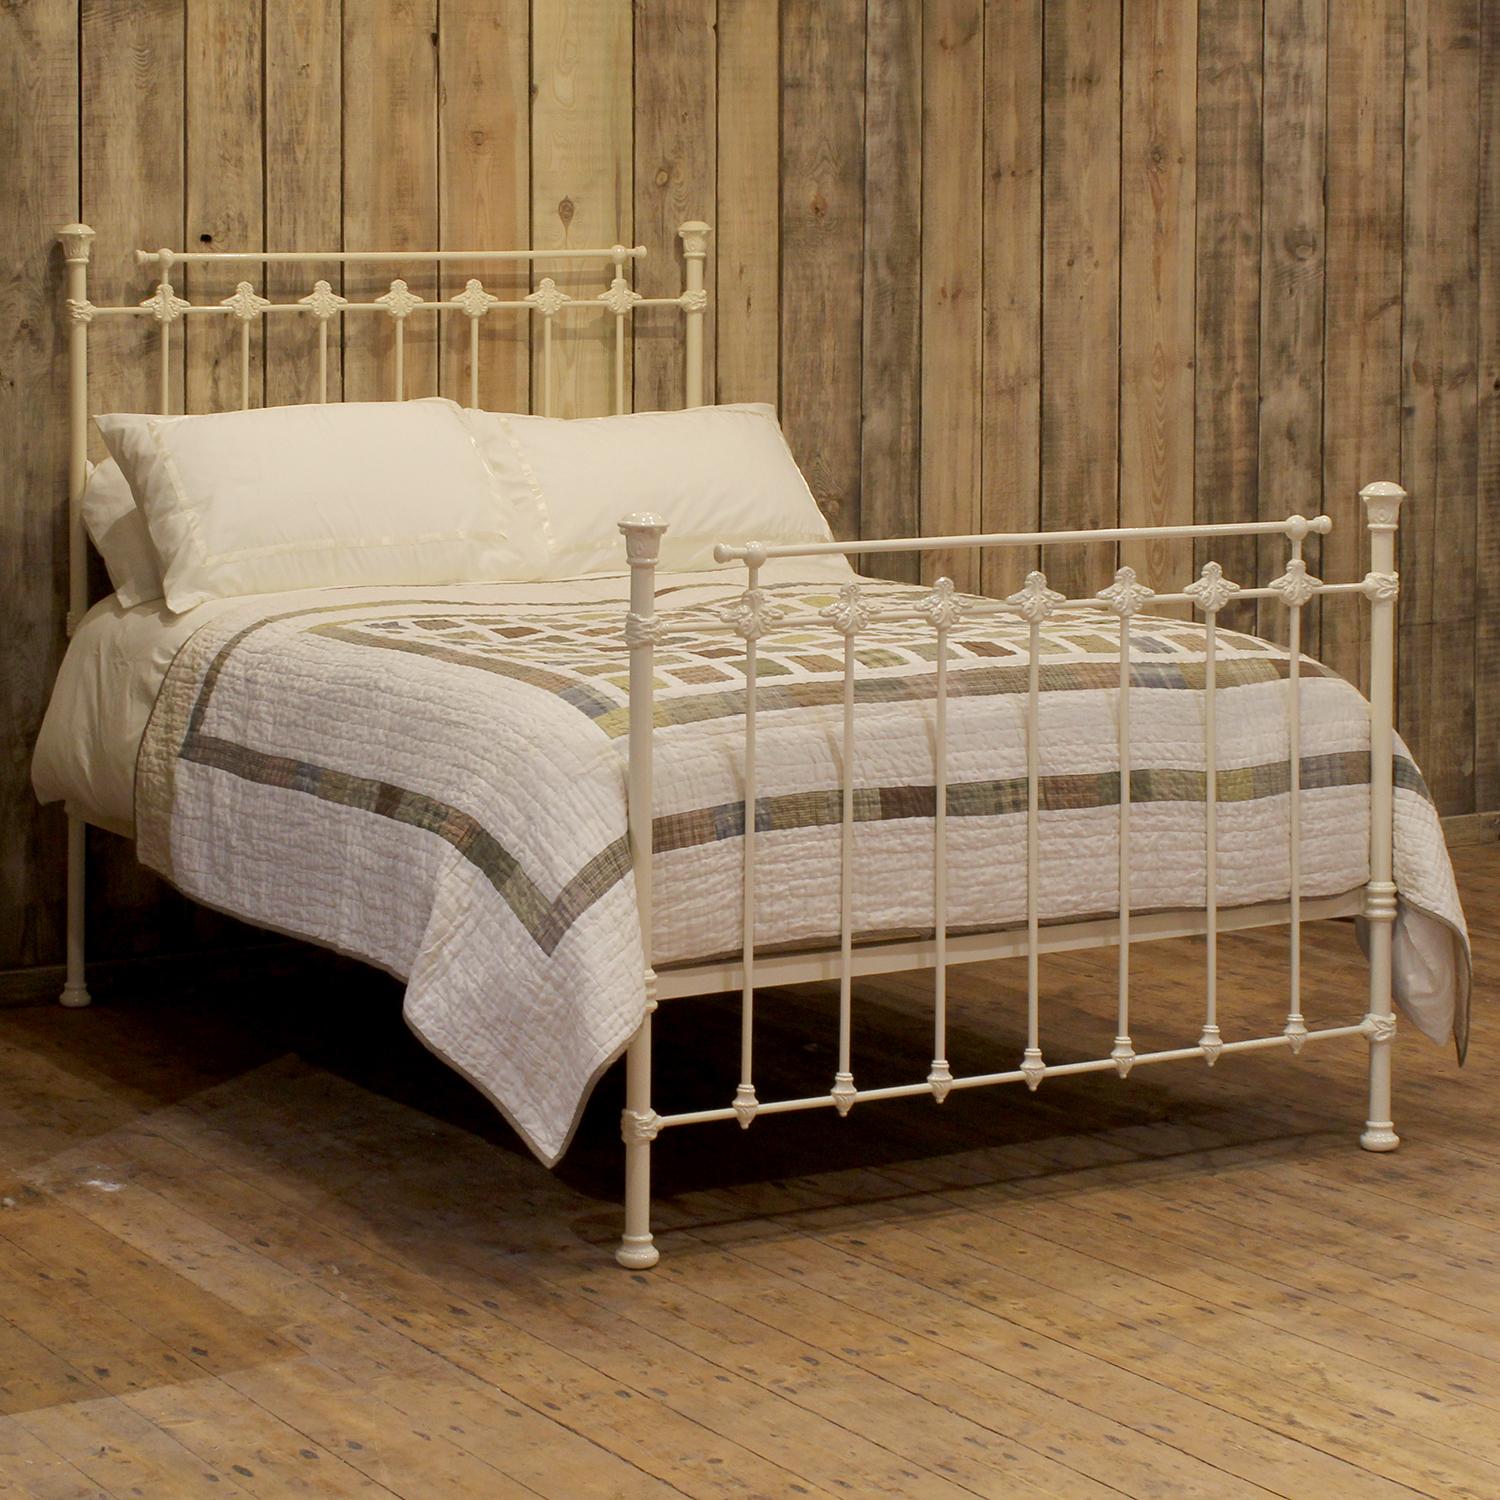 A Victorian cast iron bedstead finished in cream with decorative castings.

This bed accepts a double size 4ft 6in wide (54 inch or 135cm) base and mattress. 

The price includes a firm standard bed base to support the mattress.

The mattress,